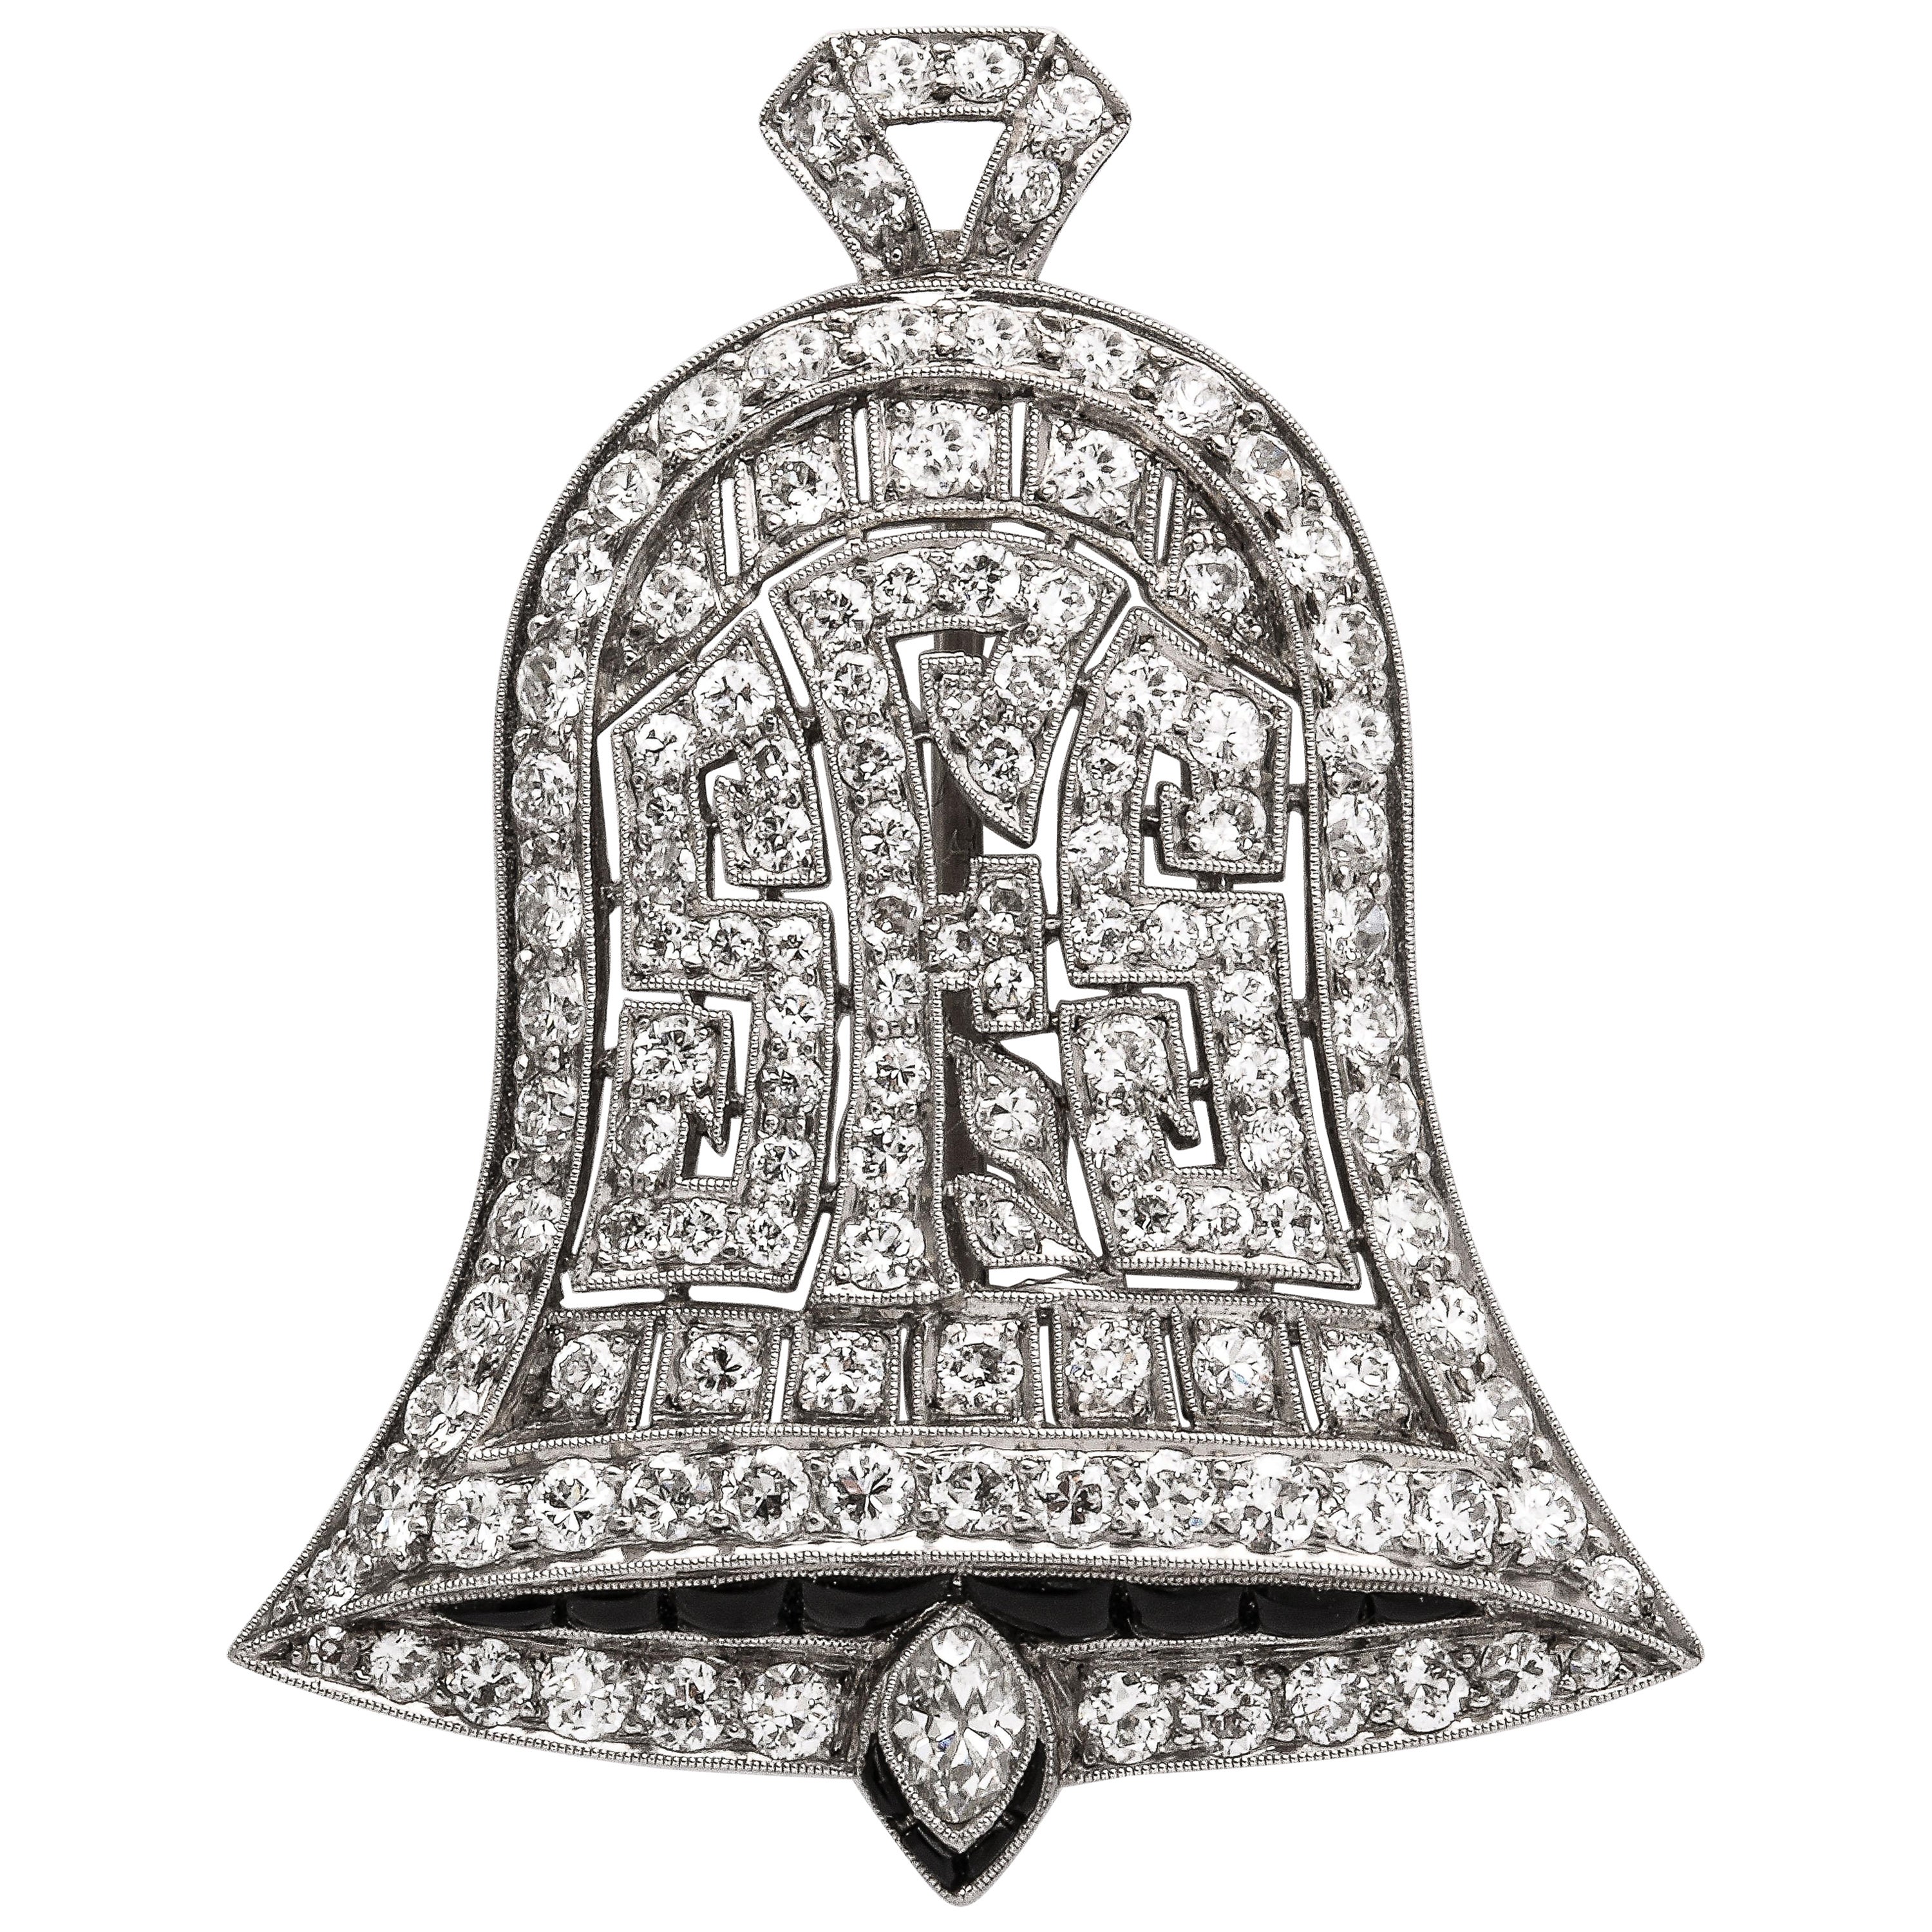 Antique Edwardian Diamond and Onyx Bell Brooch with Pendant Fitting c. 1914 For Sale